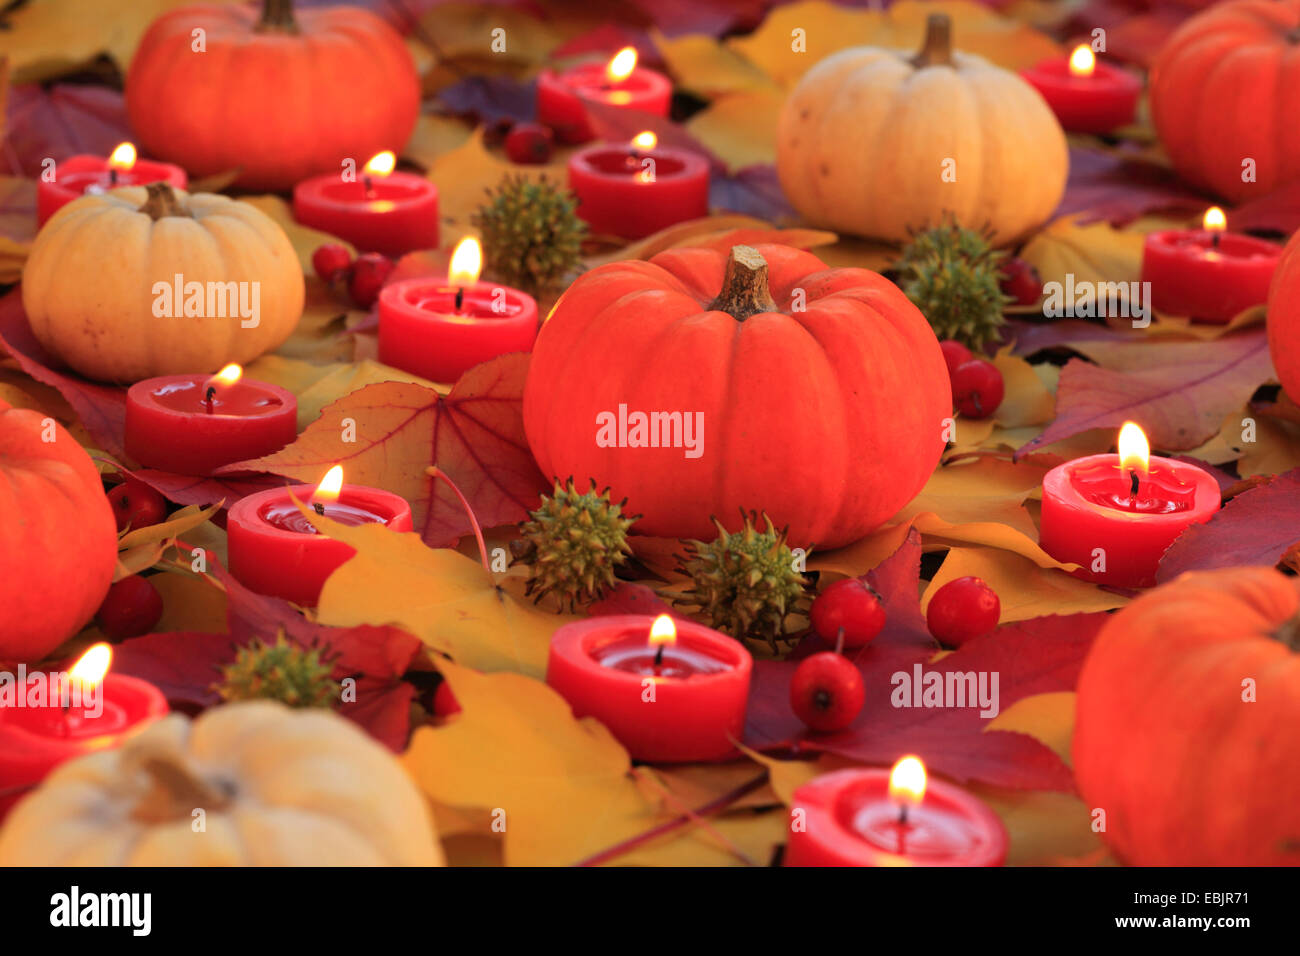 autumn decoration with pumpkins, autumn leaves and burning tea candles Stock Photo